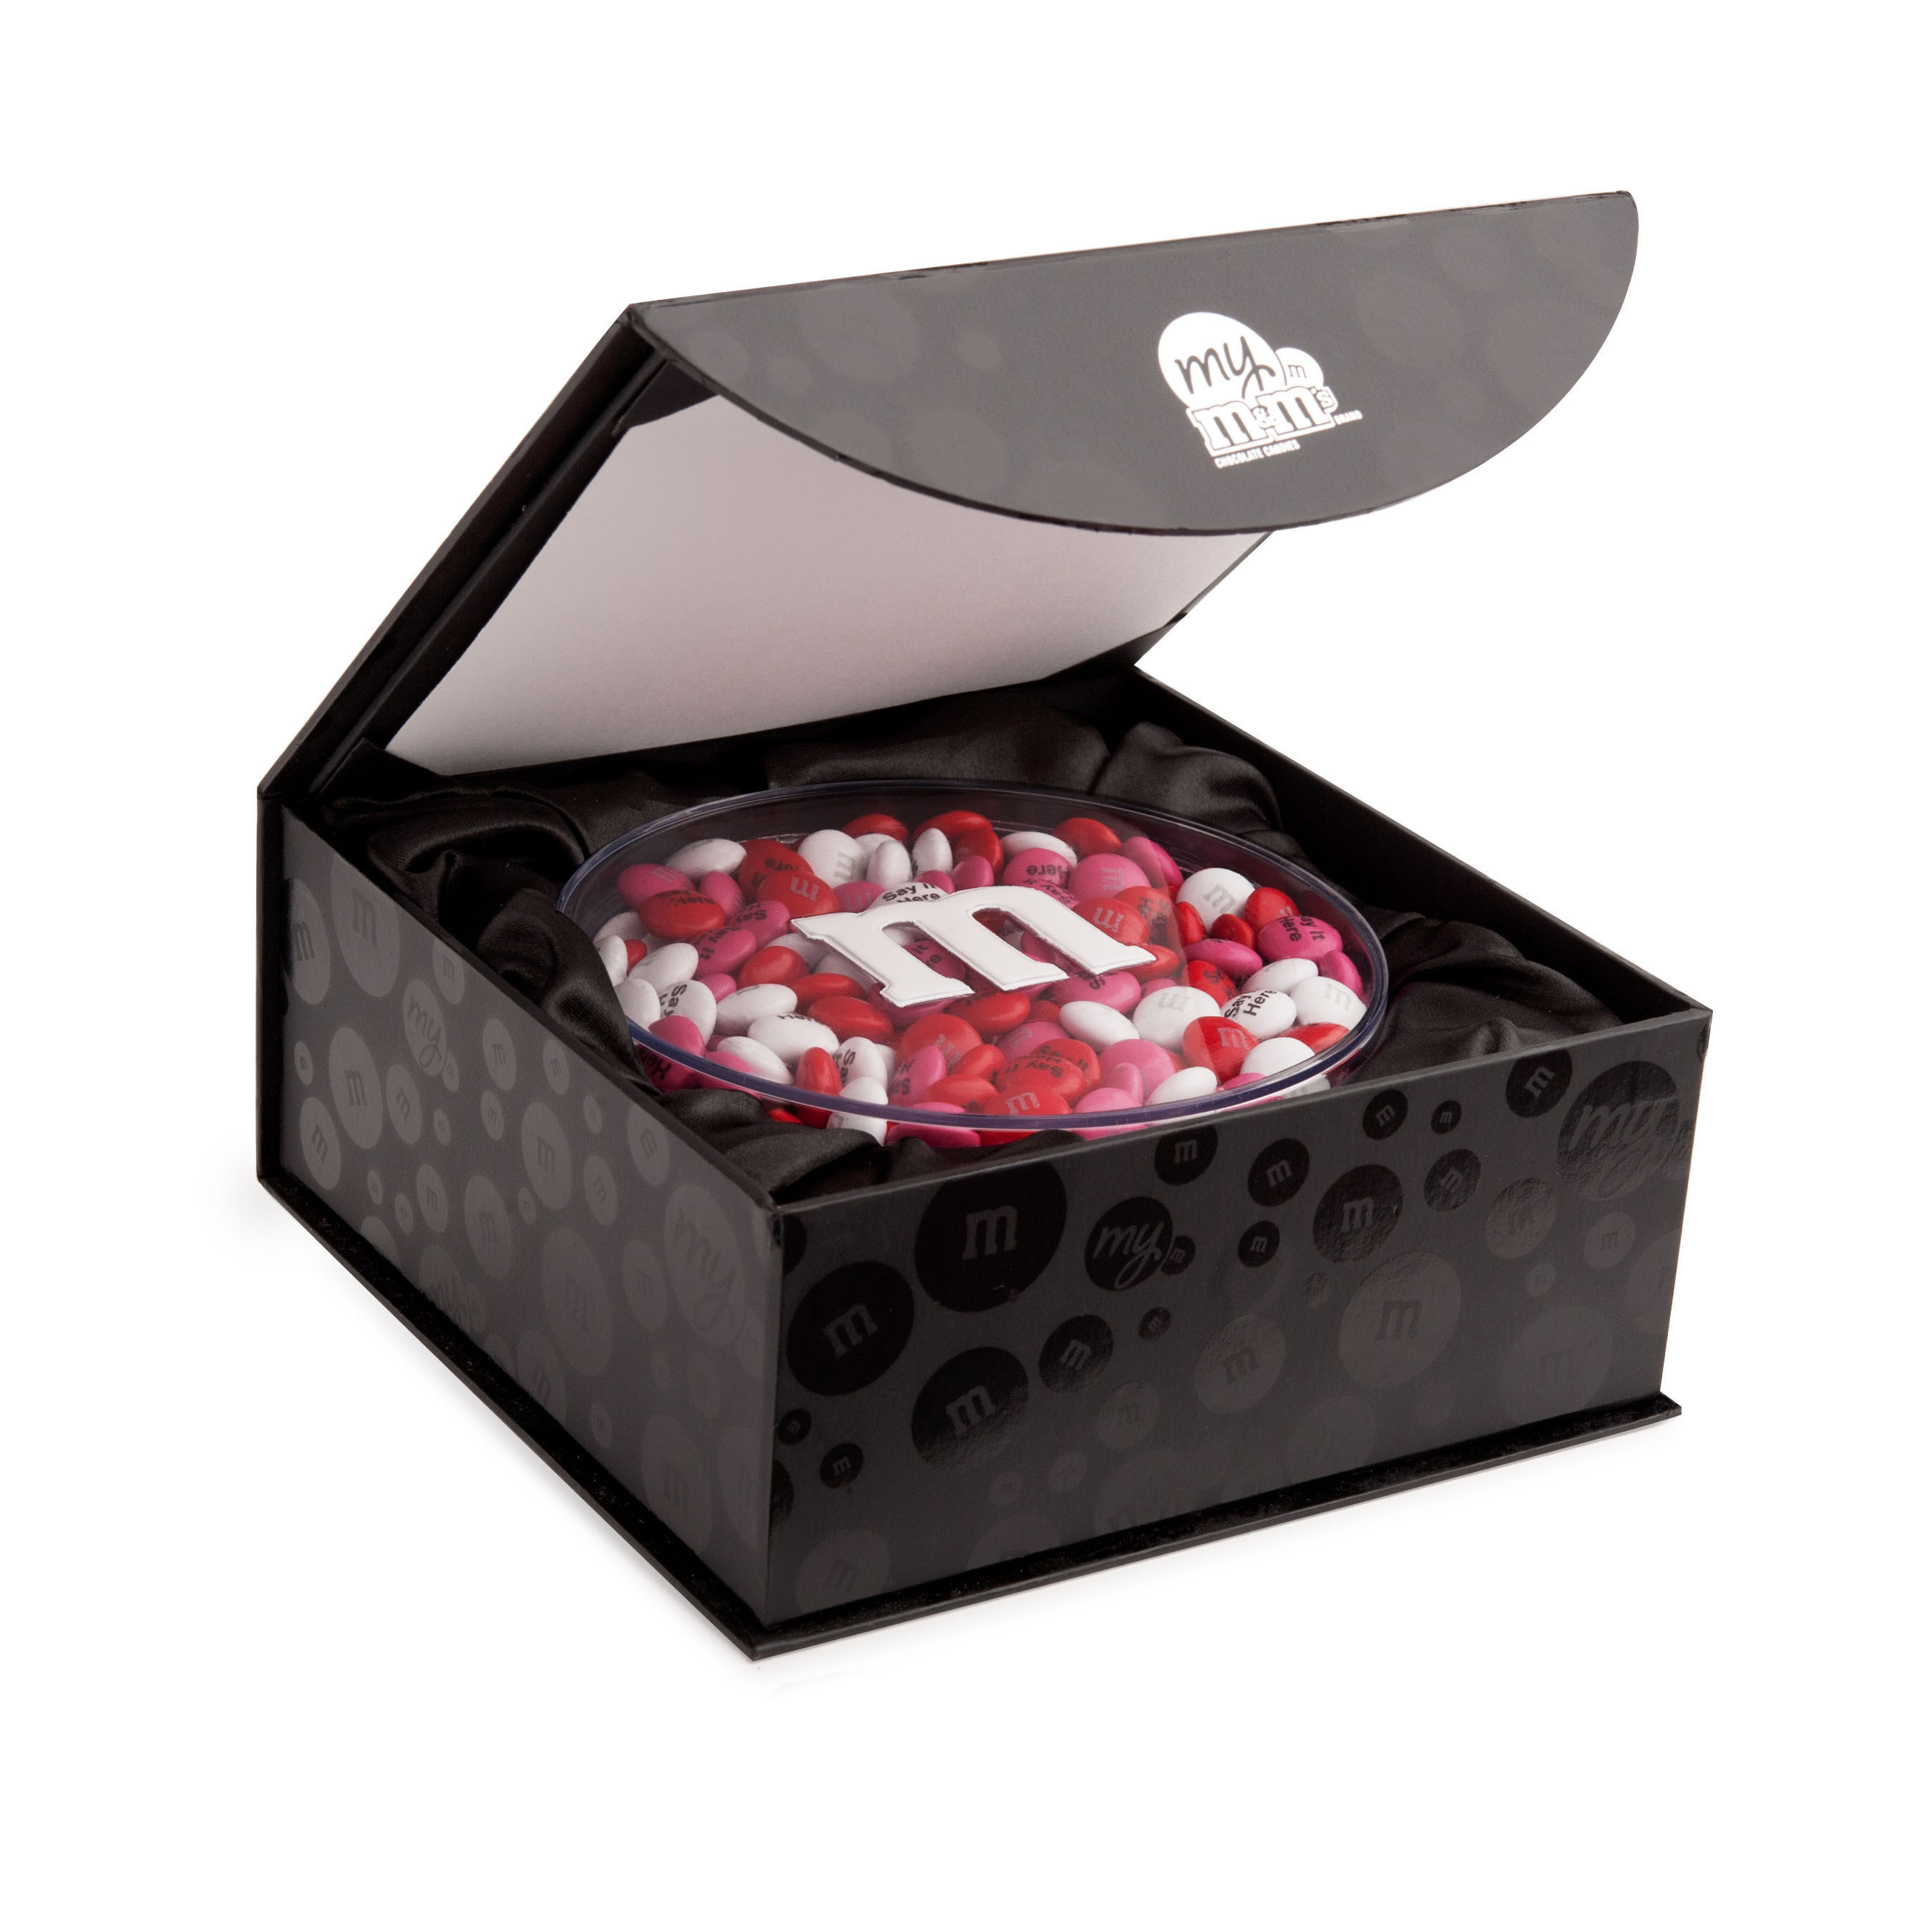 MY M&M'S® Chocolate Candies Make Valentine's Day Sweeter By